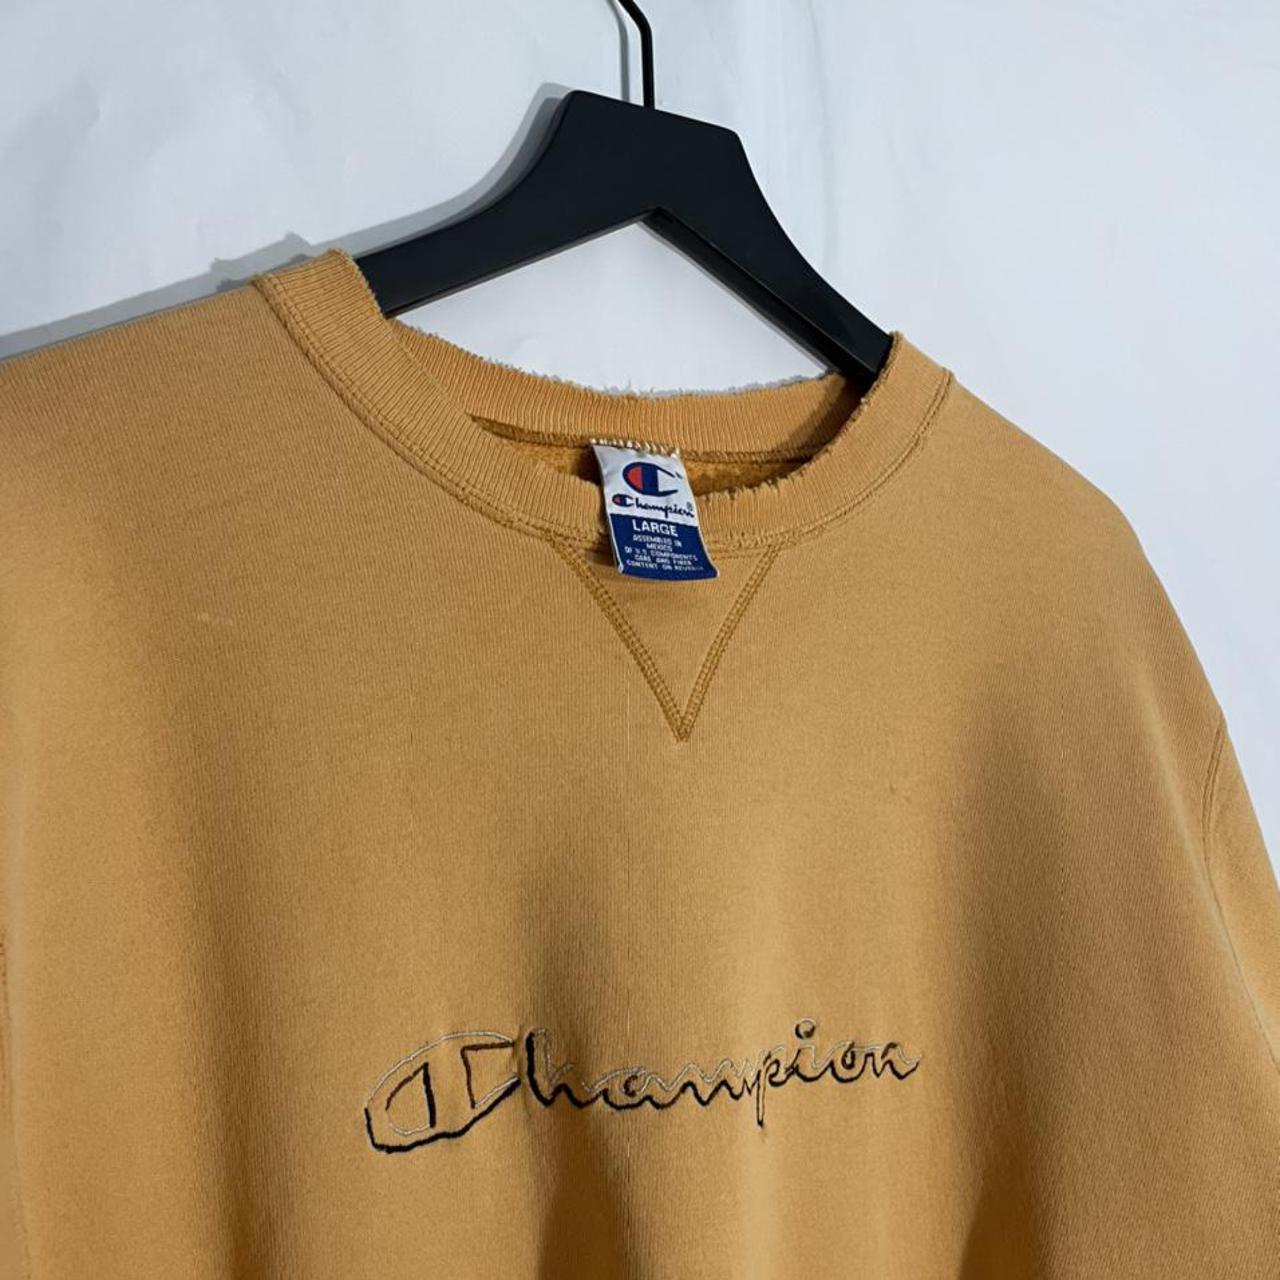 Product Image 3 - Champion Essential Yellow 90s Sweater

Champion